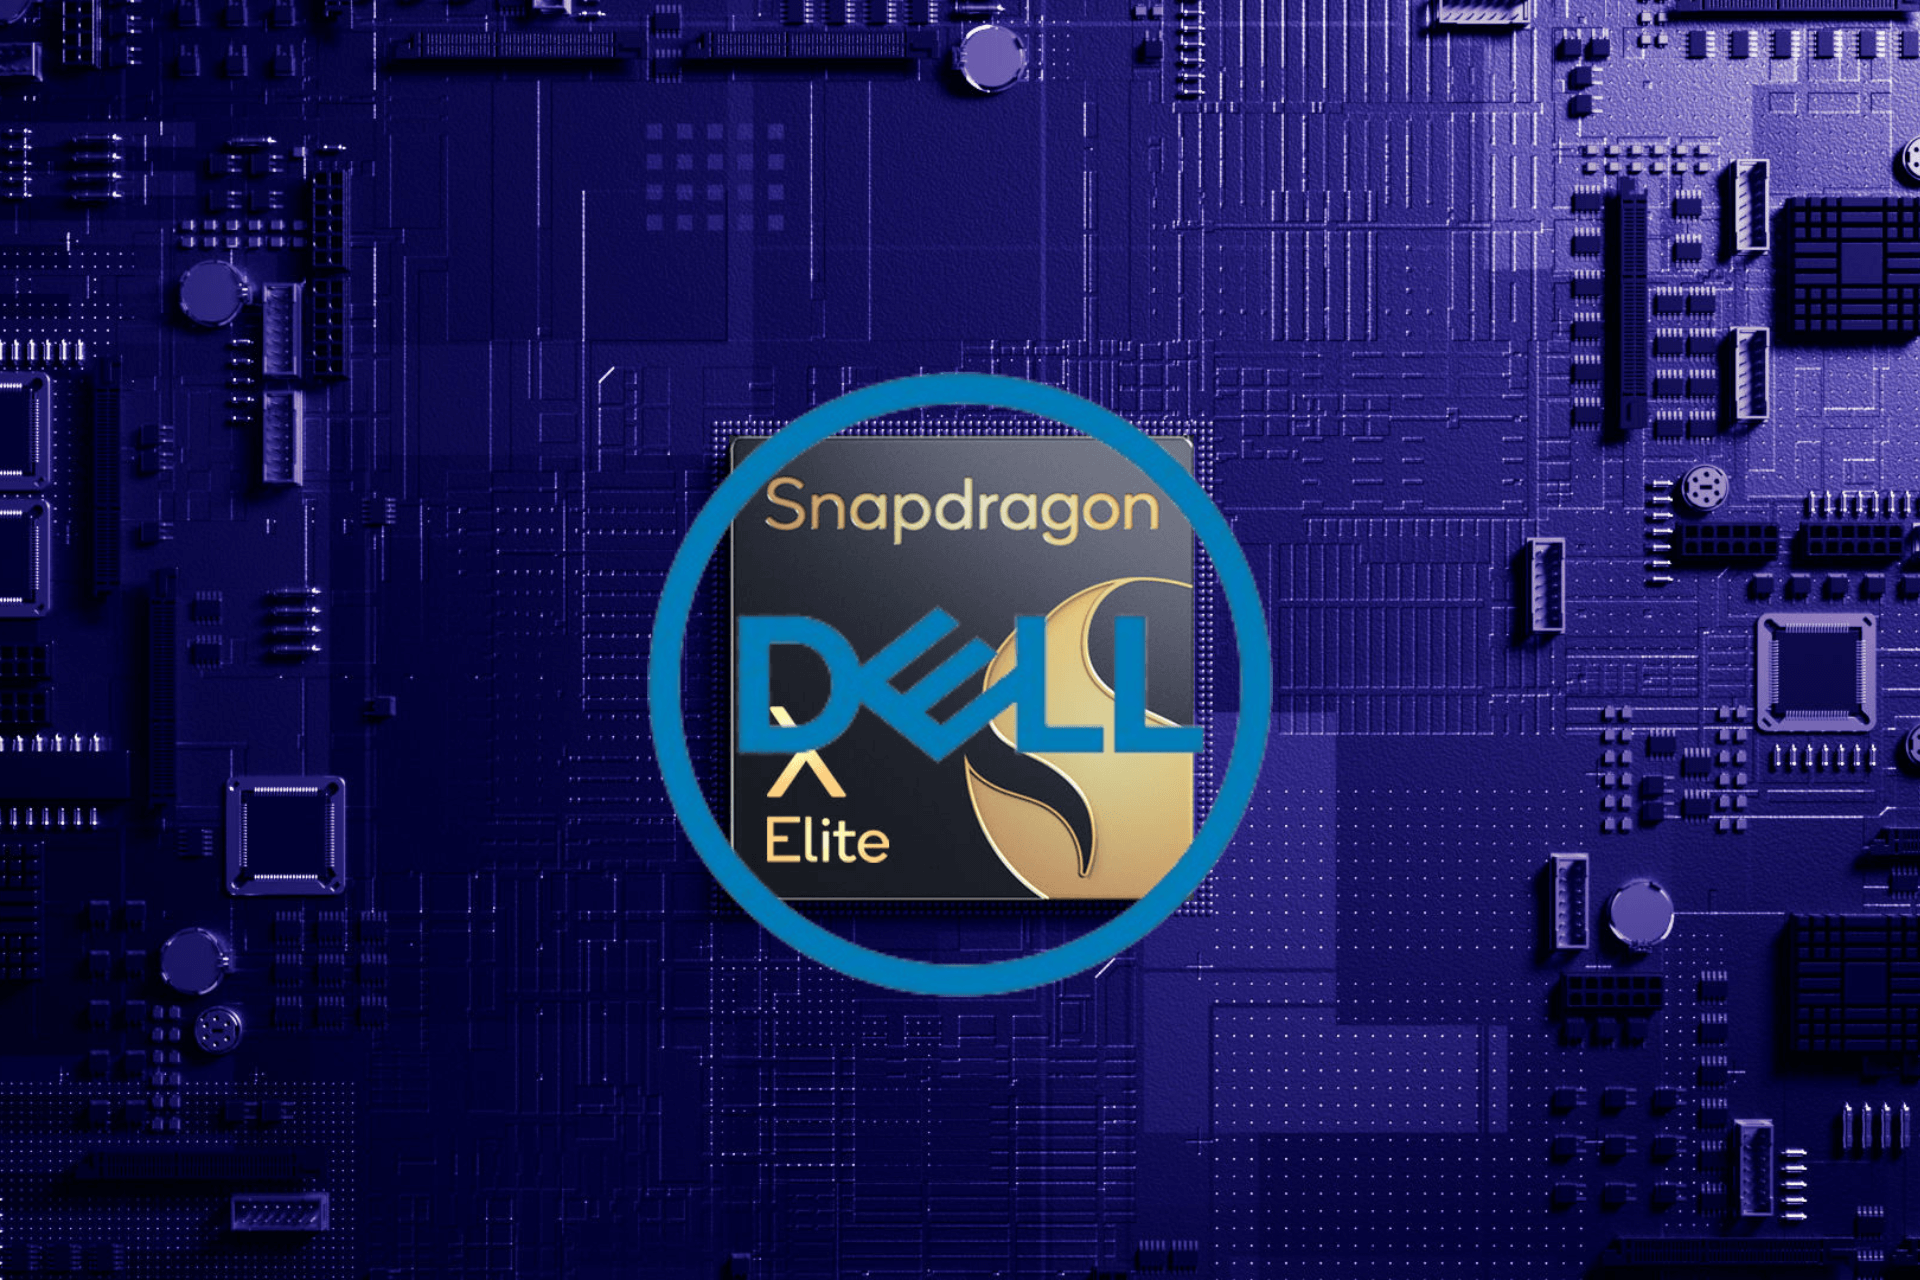 Dell joins the list of manufacturers using Snapdragon X Elite in its upcoming devices